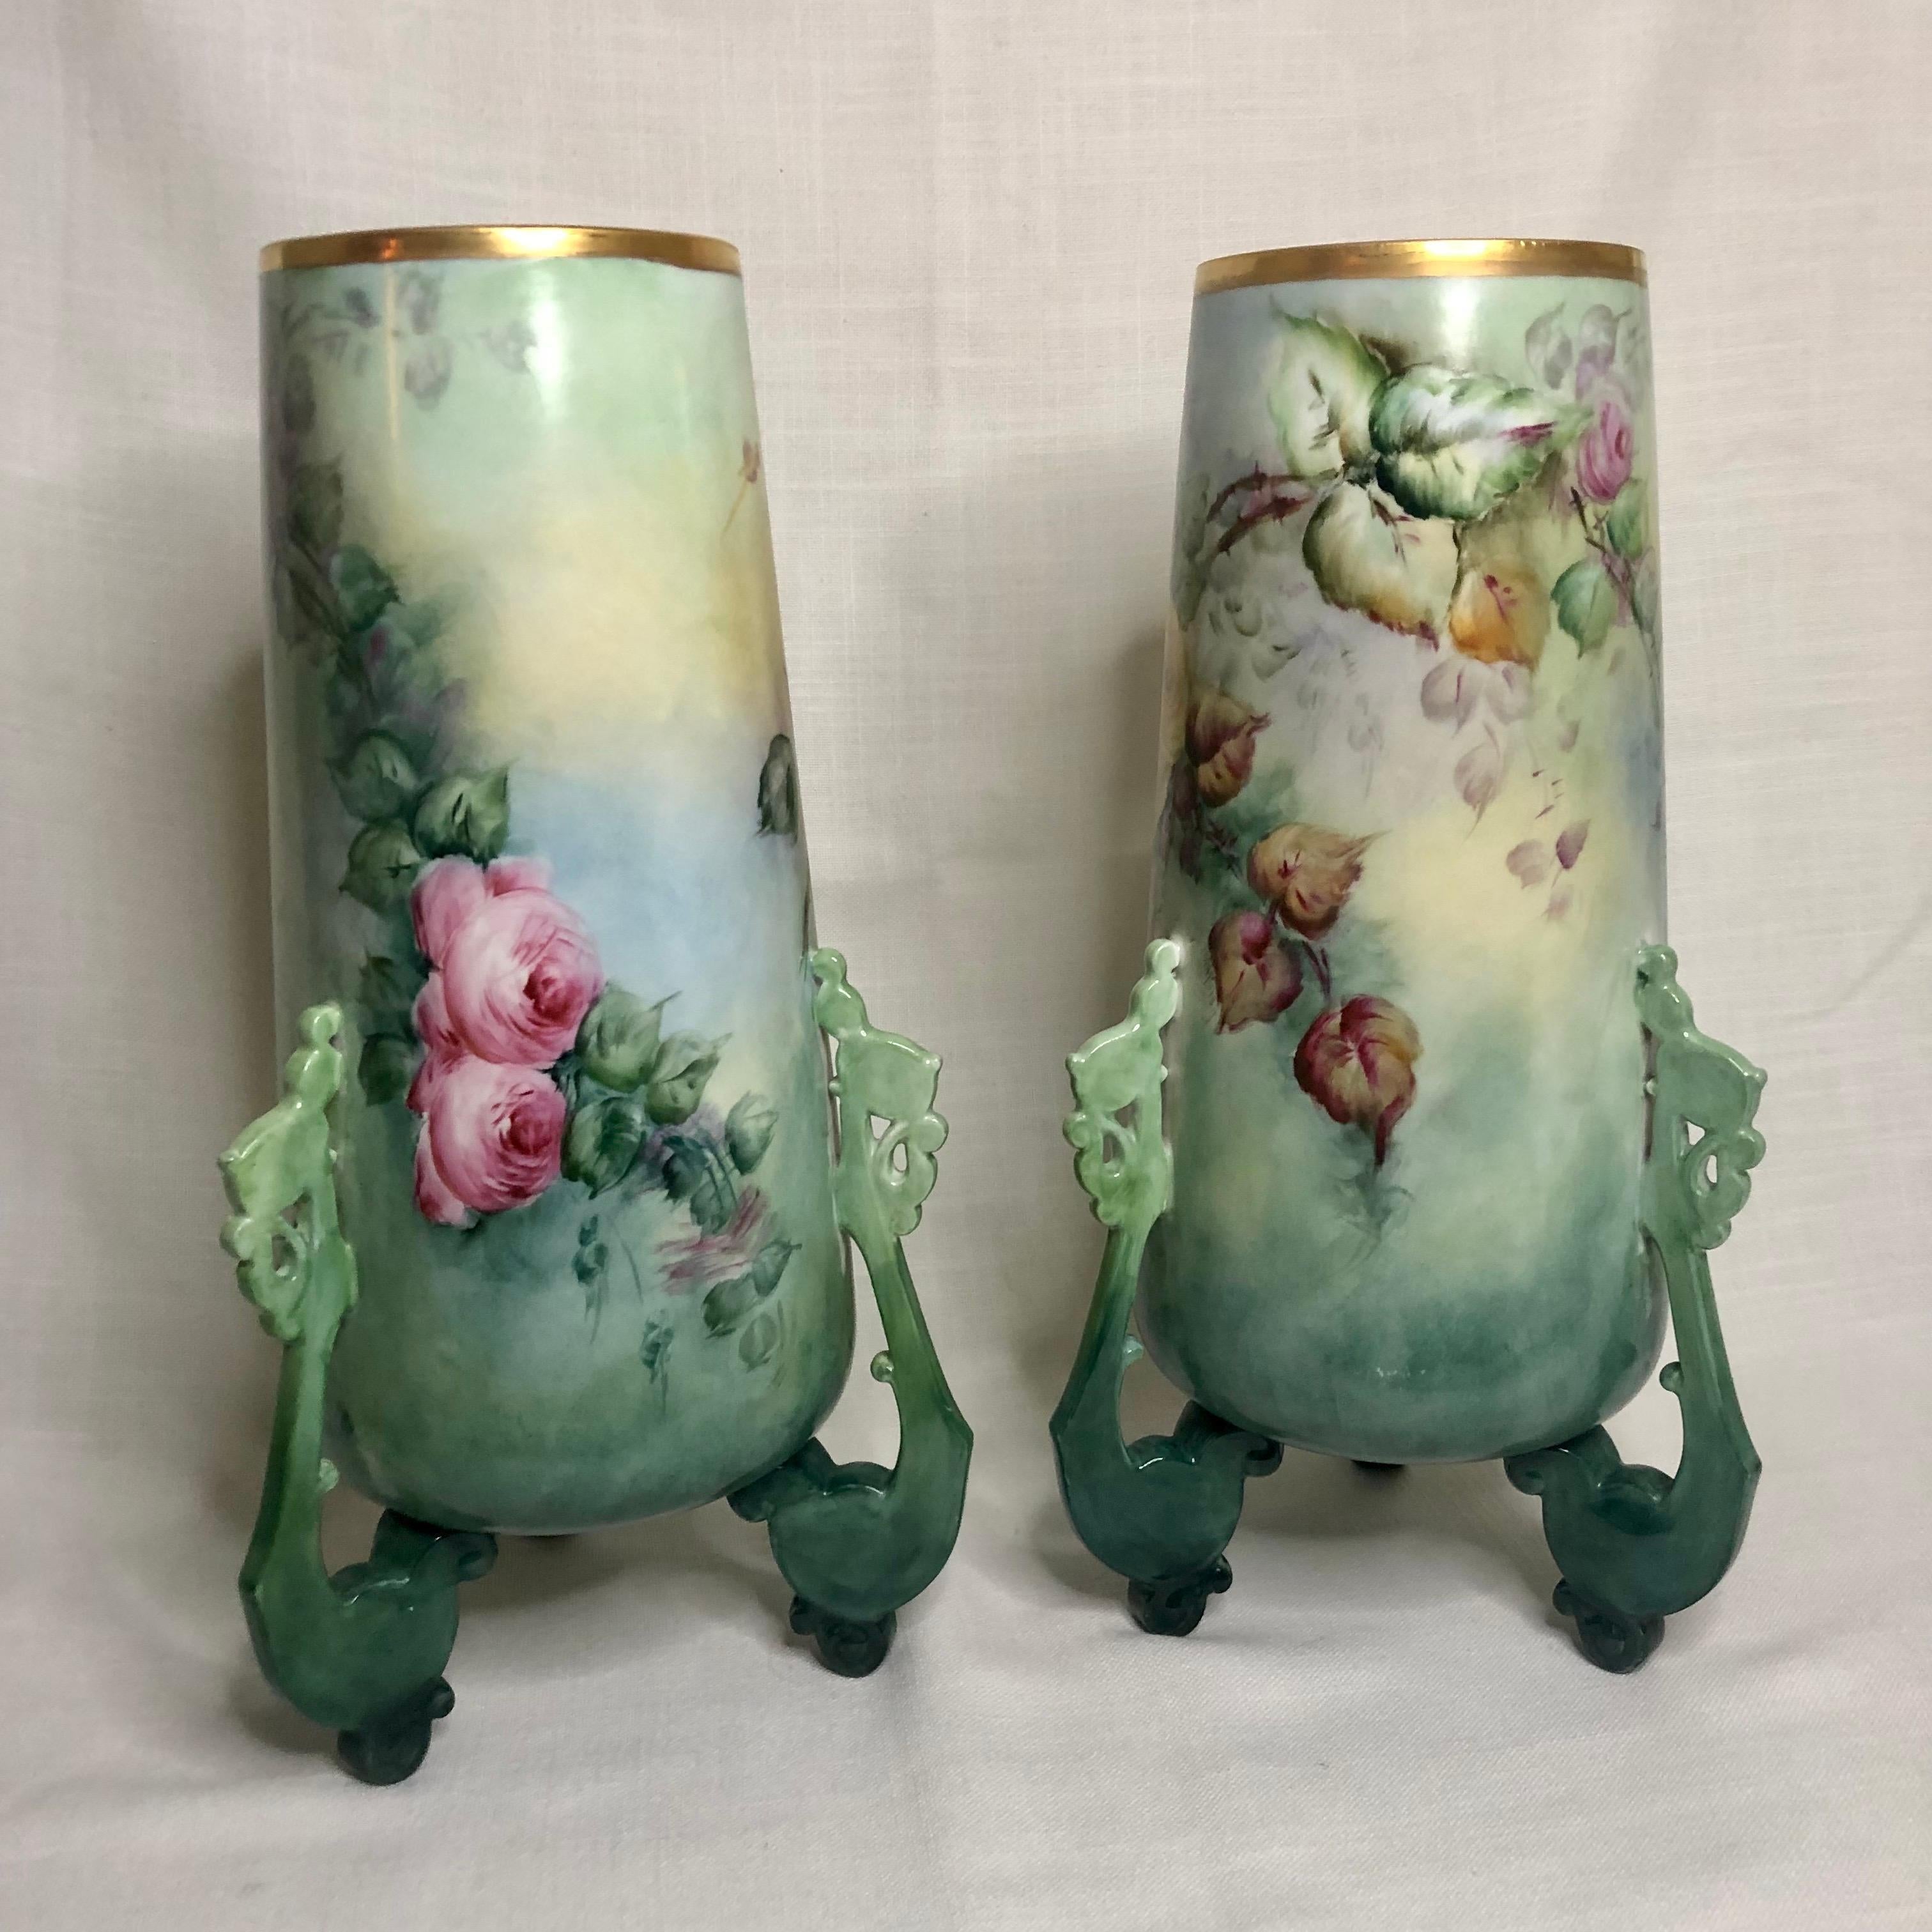 Pair of Large William Guerin Limoges Hand Painted Vases with Roses and Peonies 2